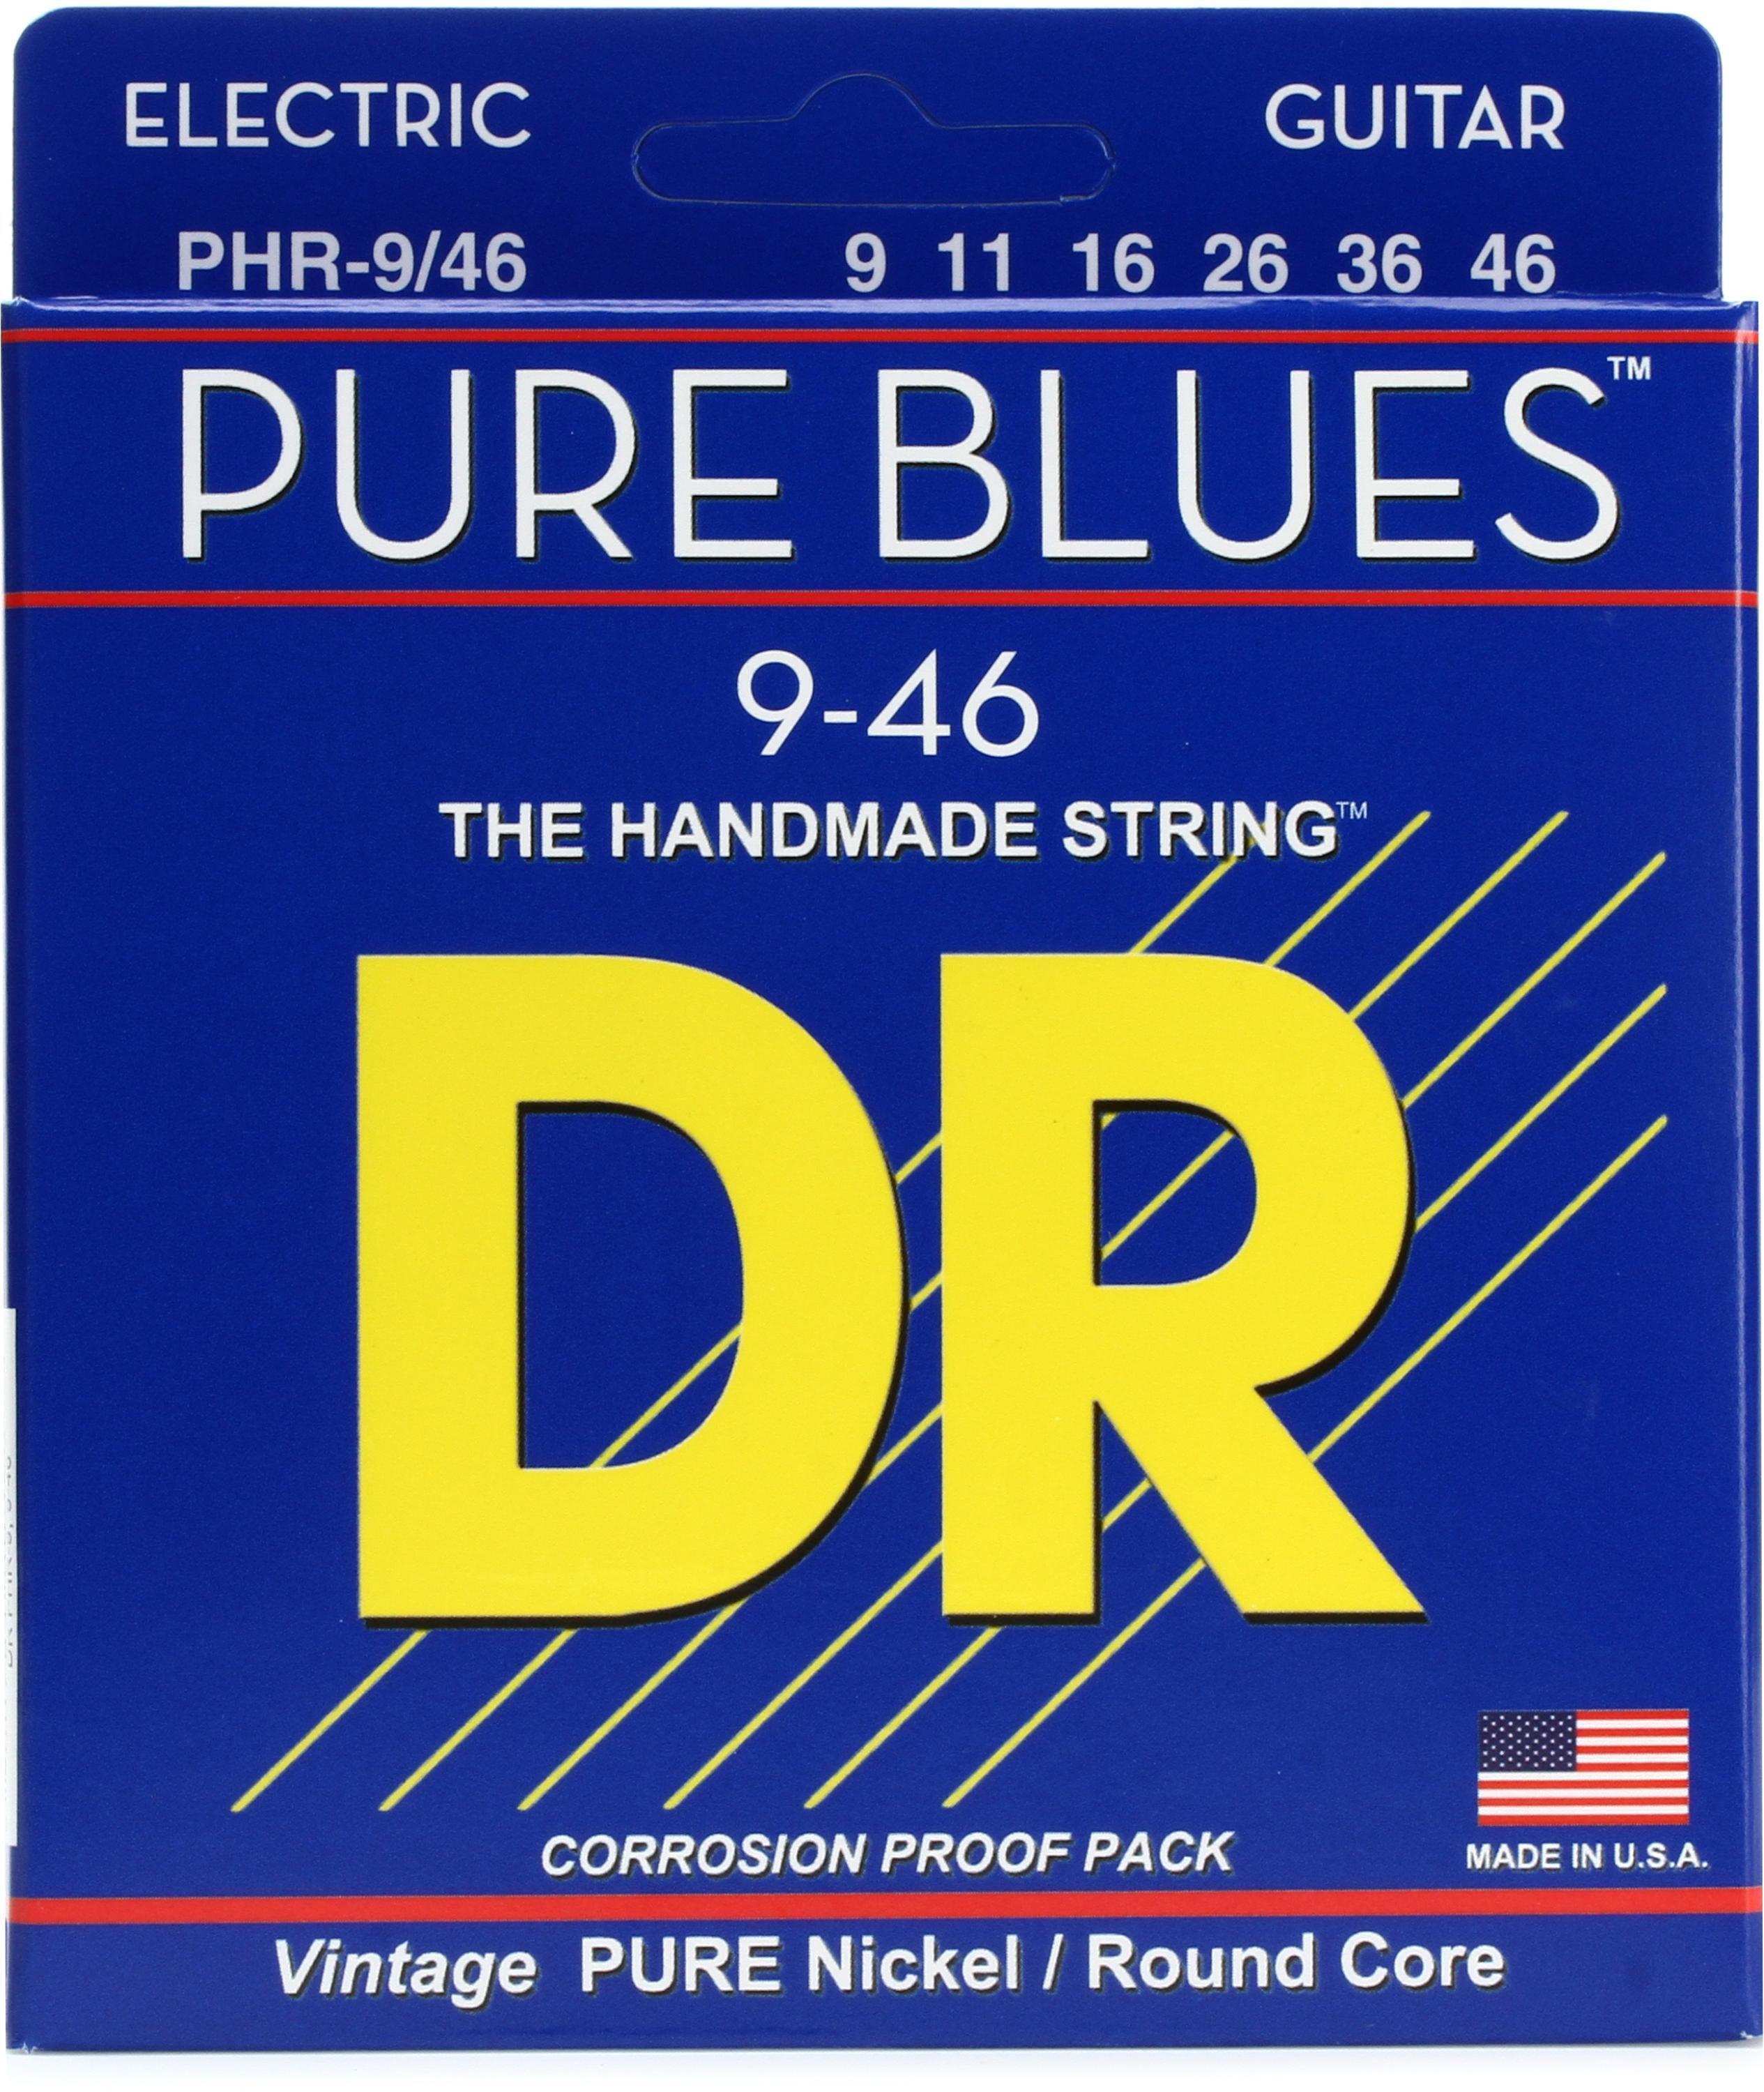 Bundled Item: DR Strings PHR-9/46 Pure Blues Pure Nickel Electric Guitar Strings - .009-.046 Light and Heavy